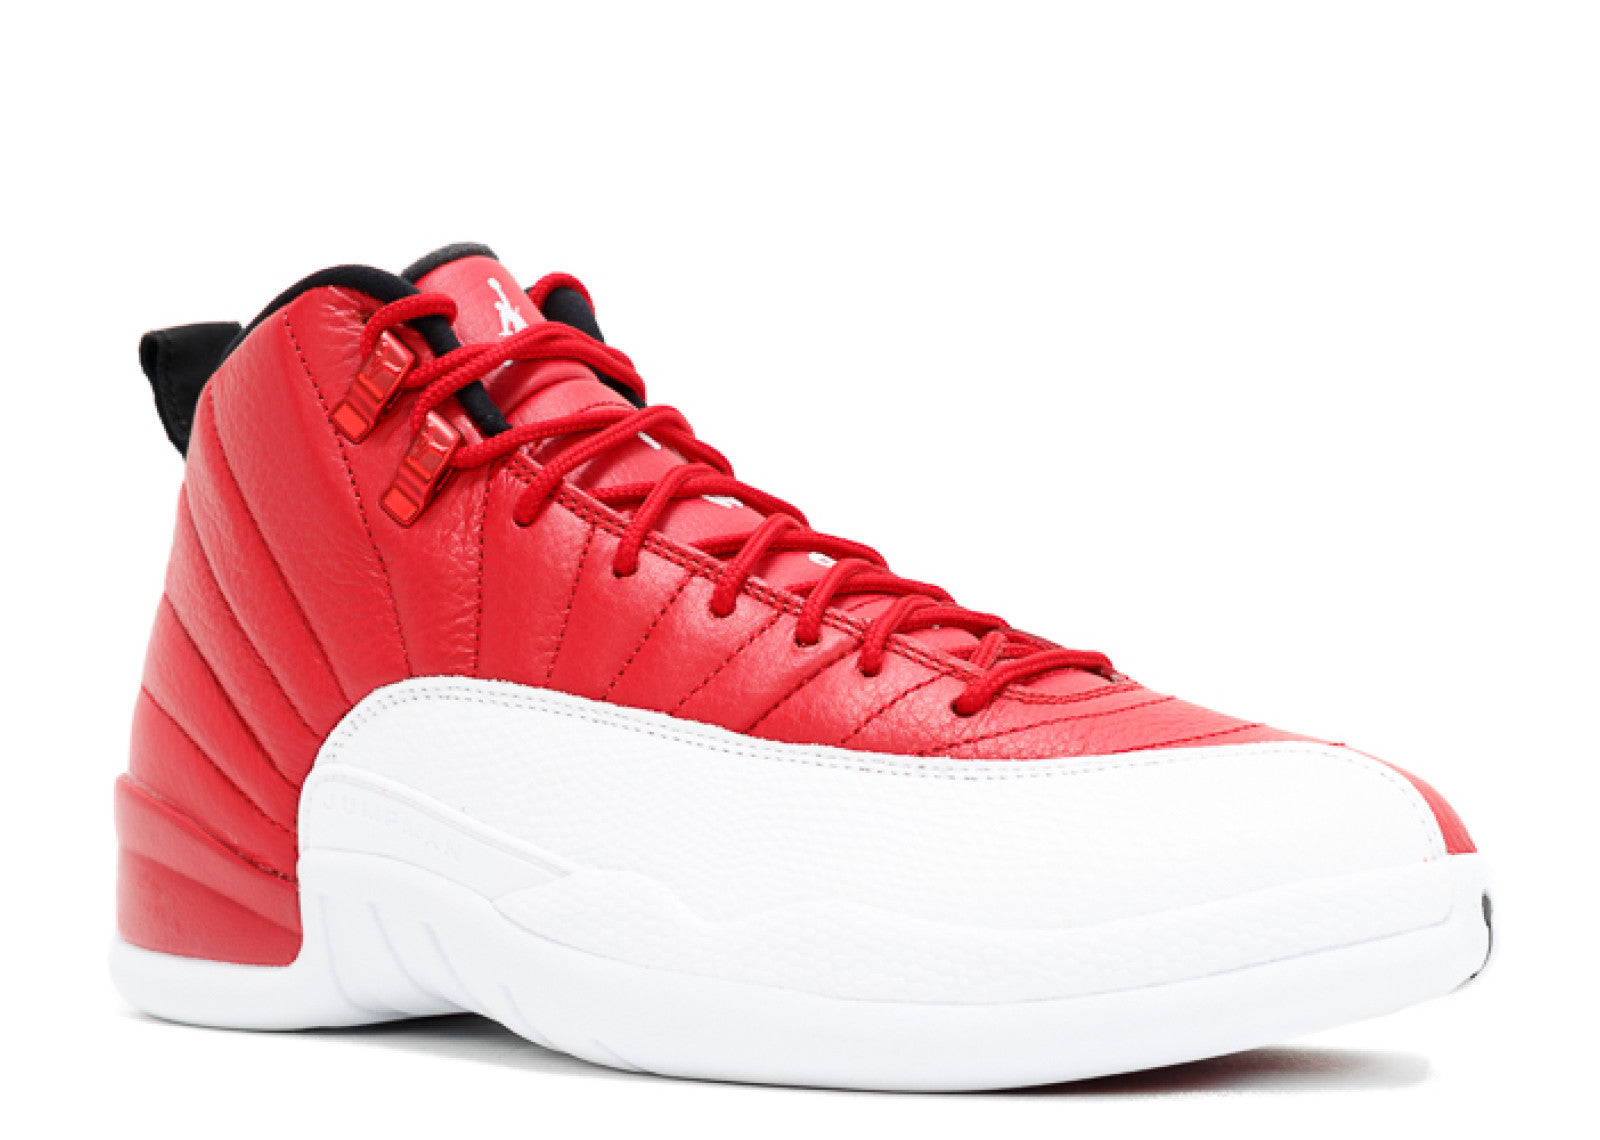 all red 12s jordans release date